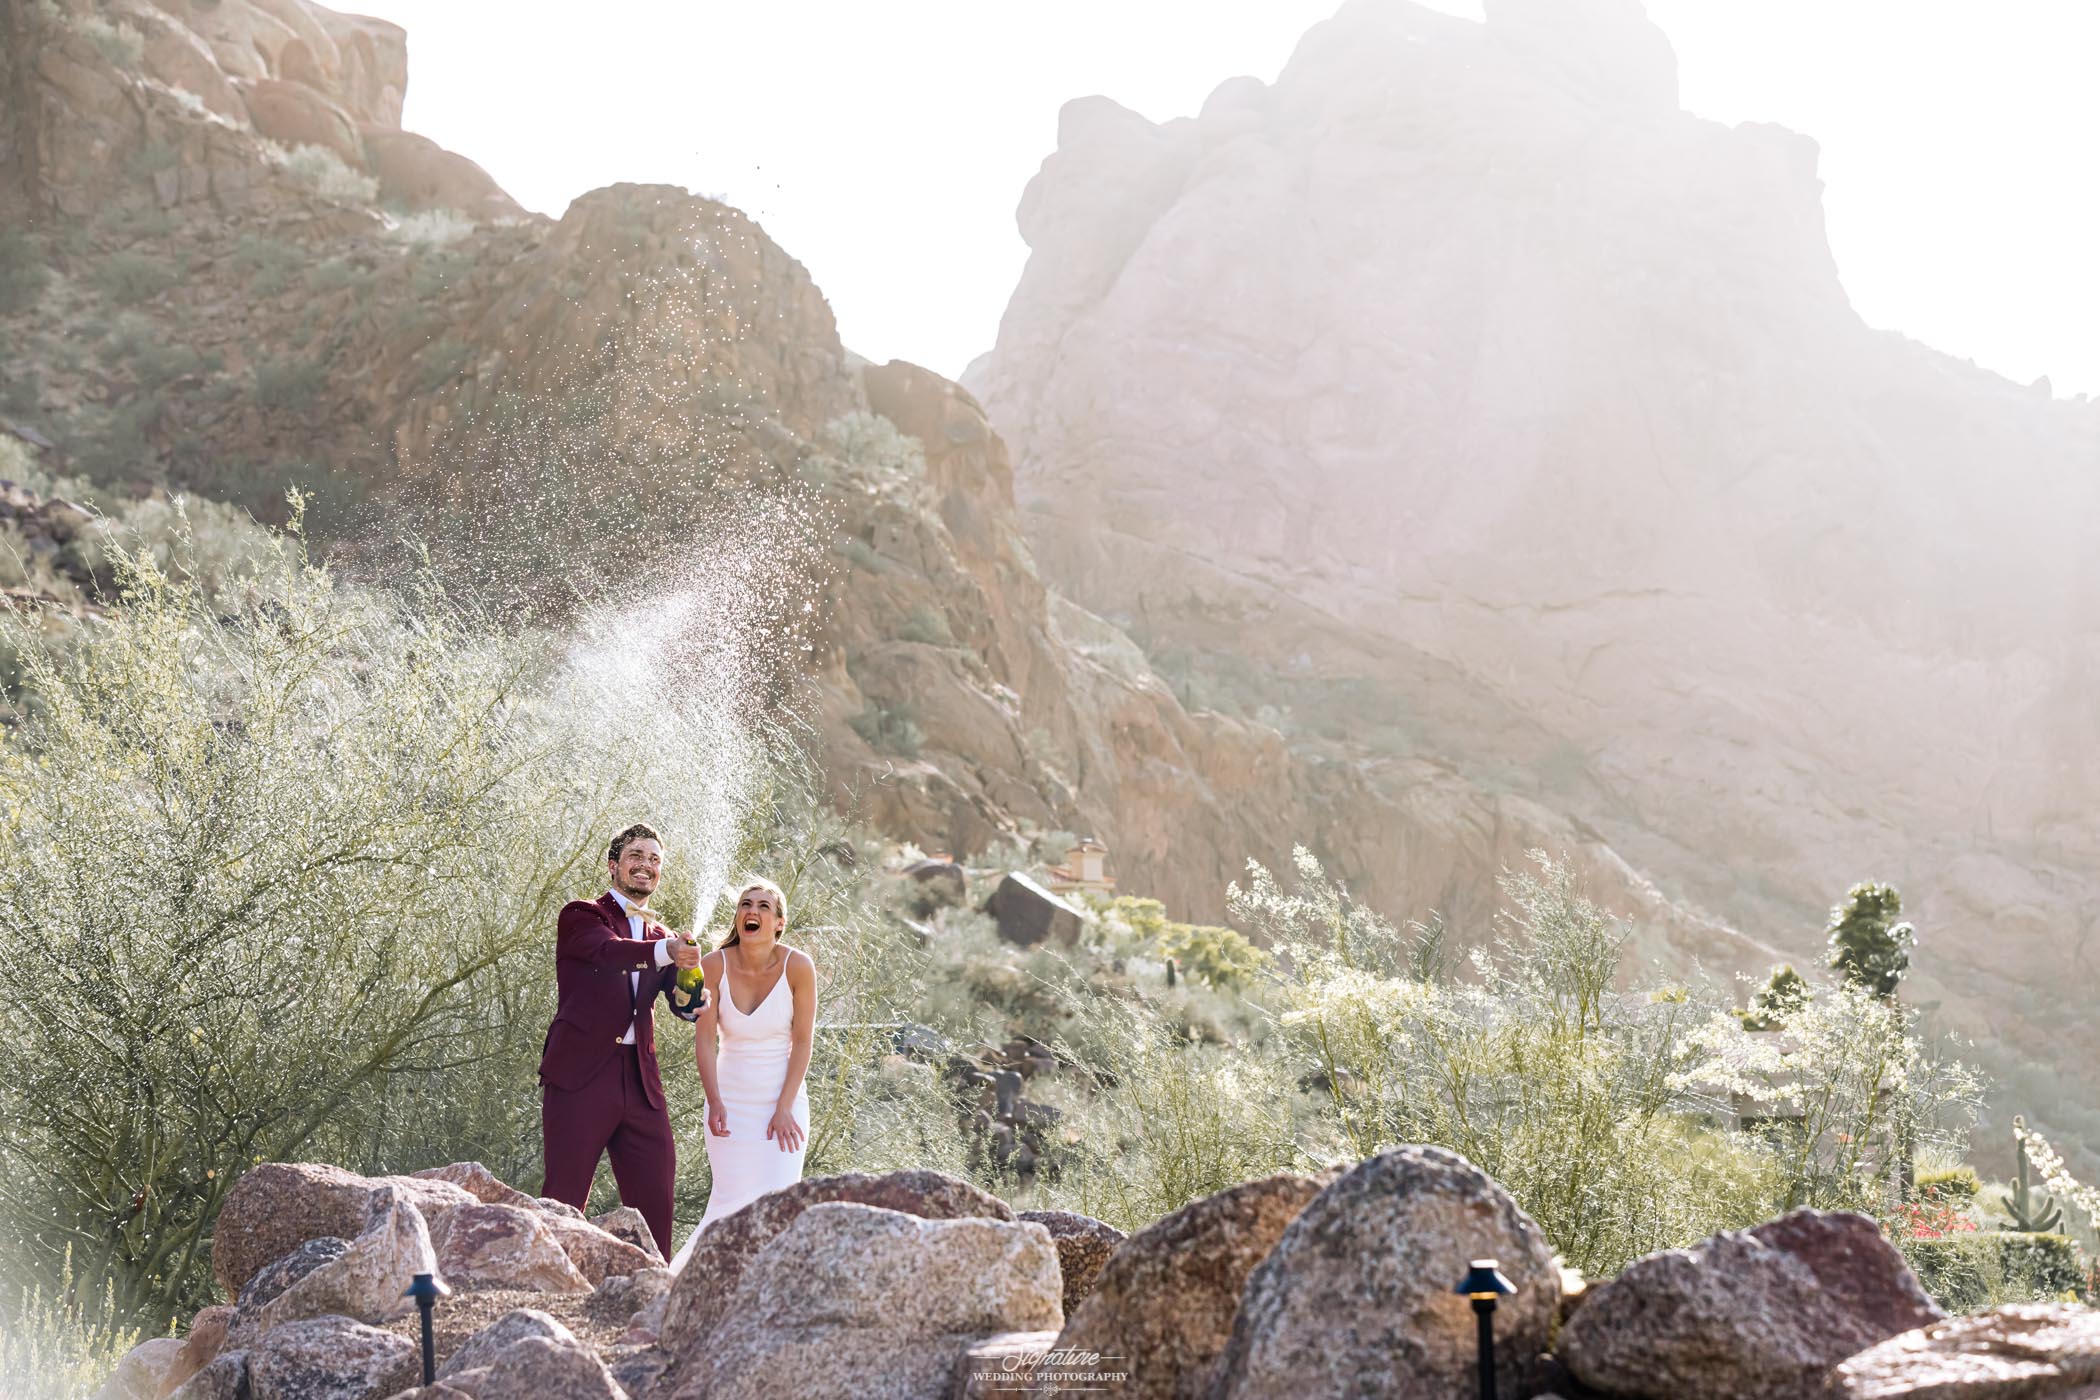 Groom spraying champagne with bride in desert